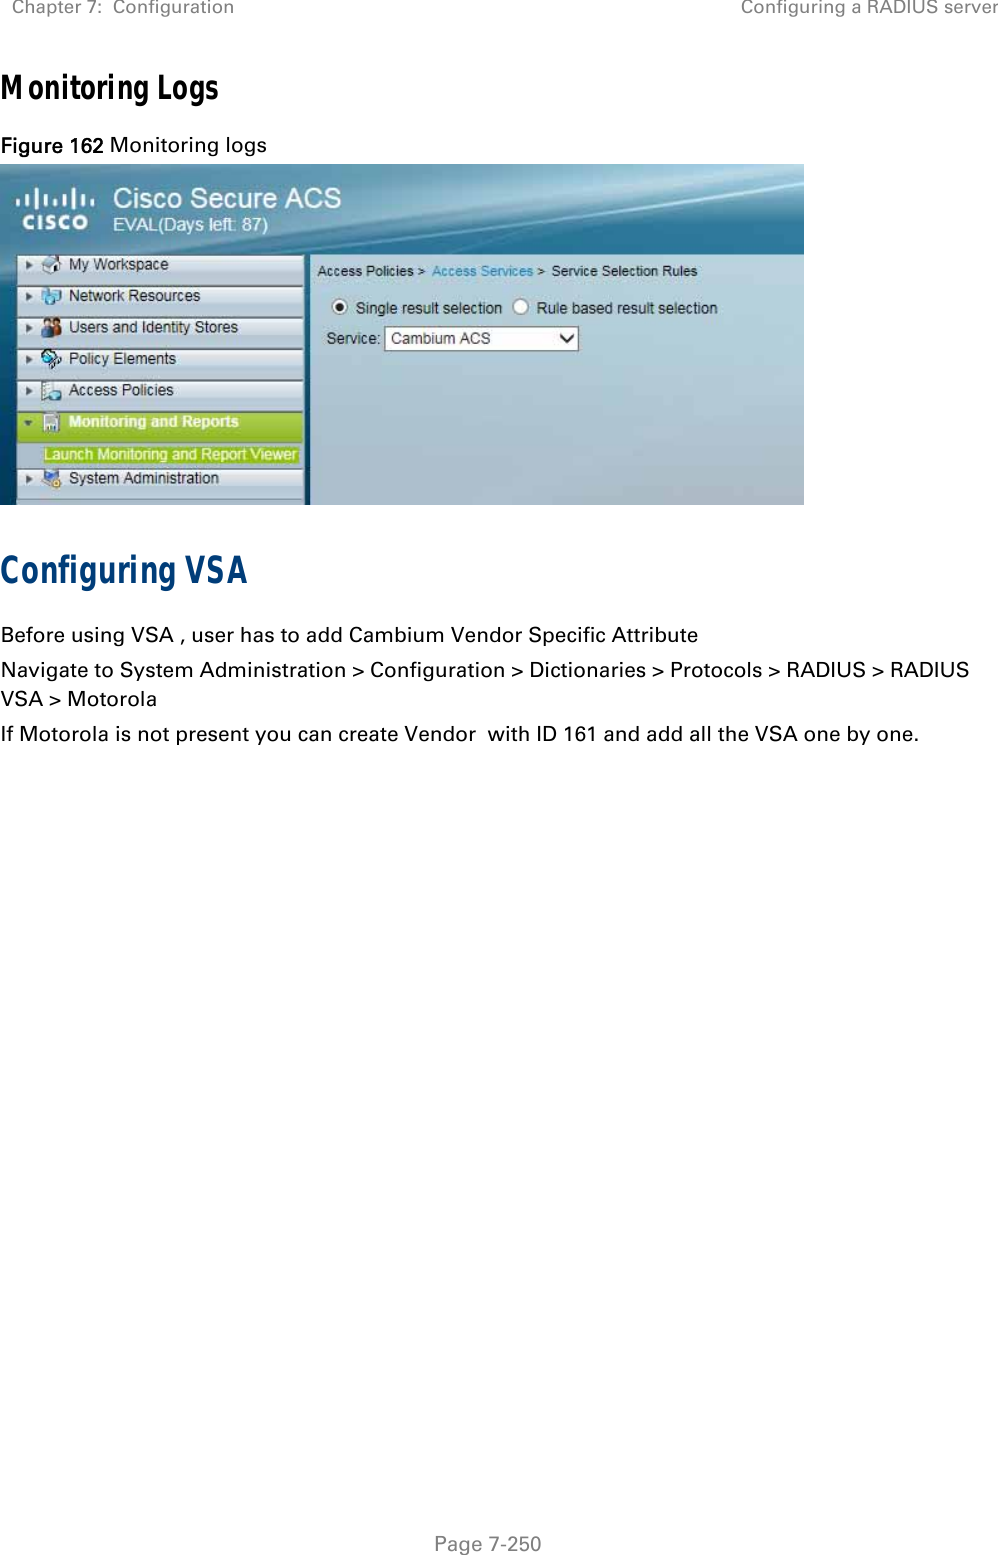 Chapter 7:  Configuration  Configuring a RADIUS server   Page 7-250 Monitoring Logs Figure 162 Monitoring logs  Configuring VSA Before using VSA , user has to add Cambium Vendor Specific Attribute Navigate to System Administration &gt; Configuration &gt; Dictionaries &gt; Protocols &gt; RADIUS &gt; RADIUS VSA &gt; Motorola If Motorola is not present you can create Vendor  with ID 161 and add all the VSA one by one.   